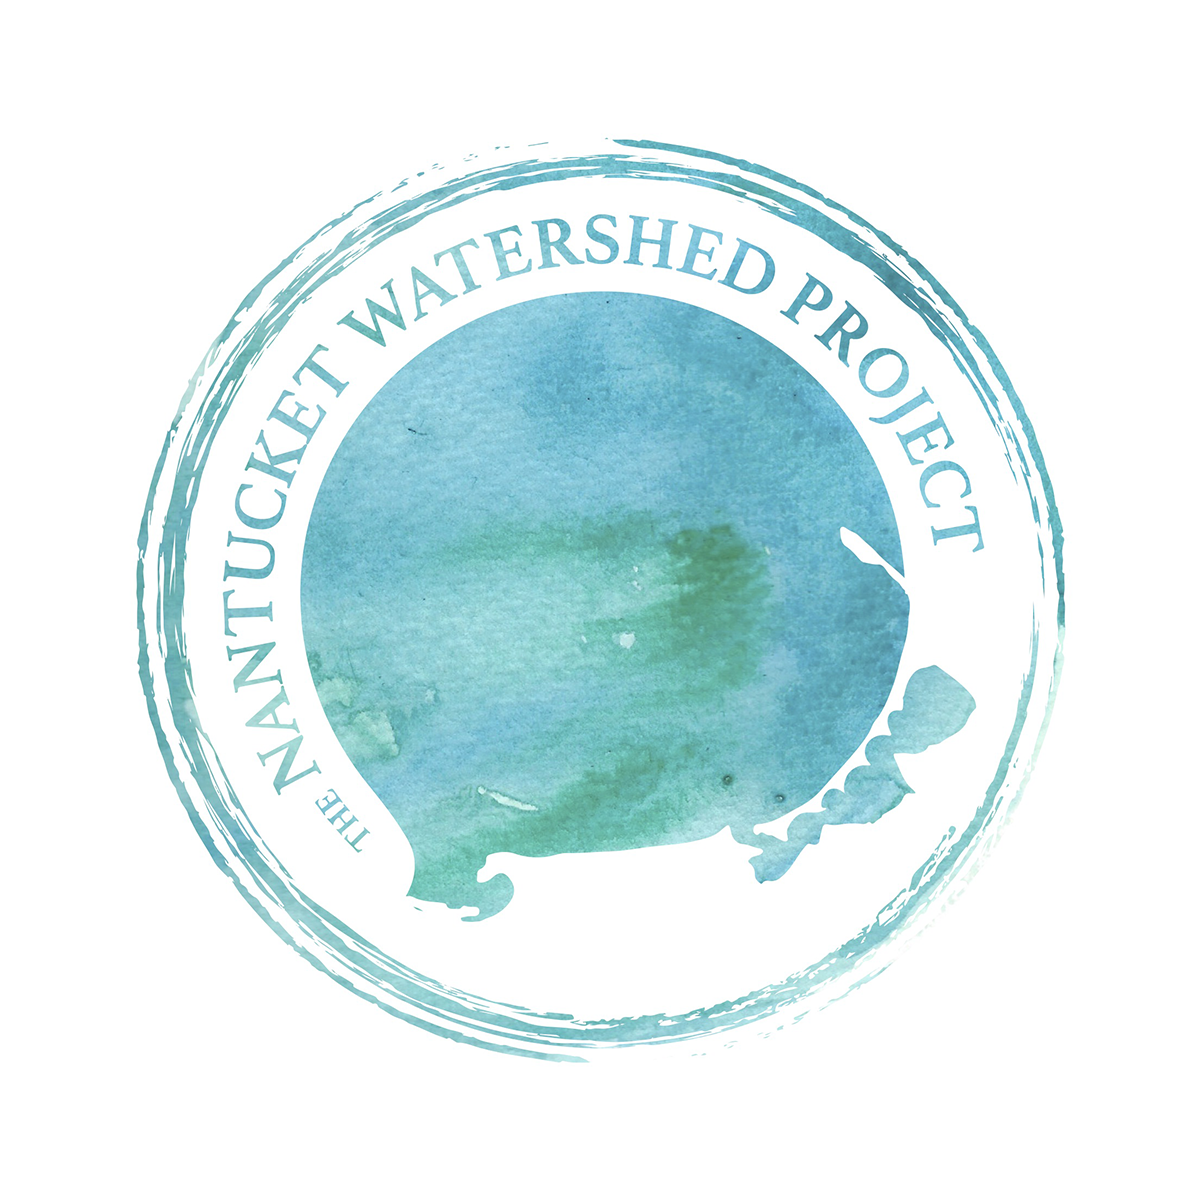 Nantucket Watershed Project 